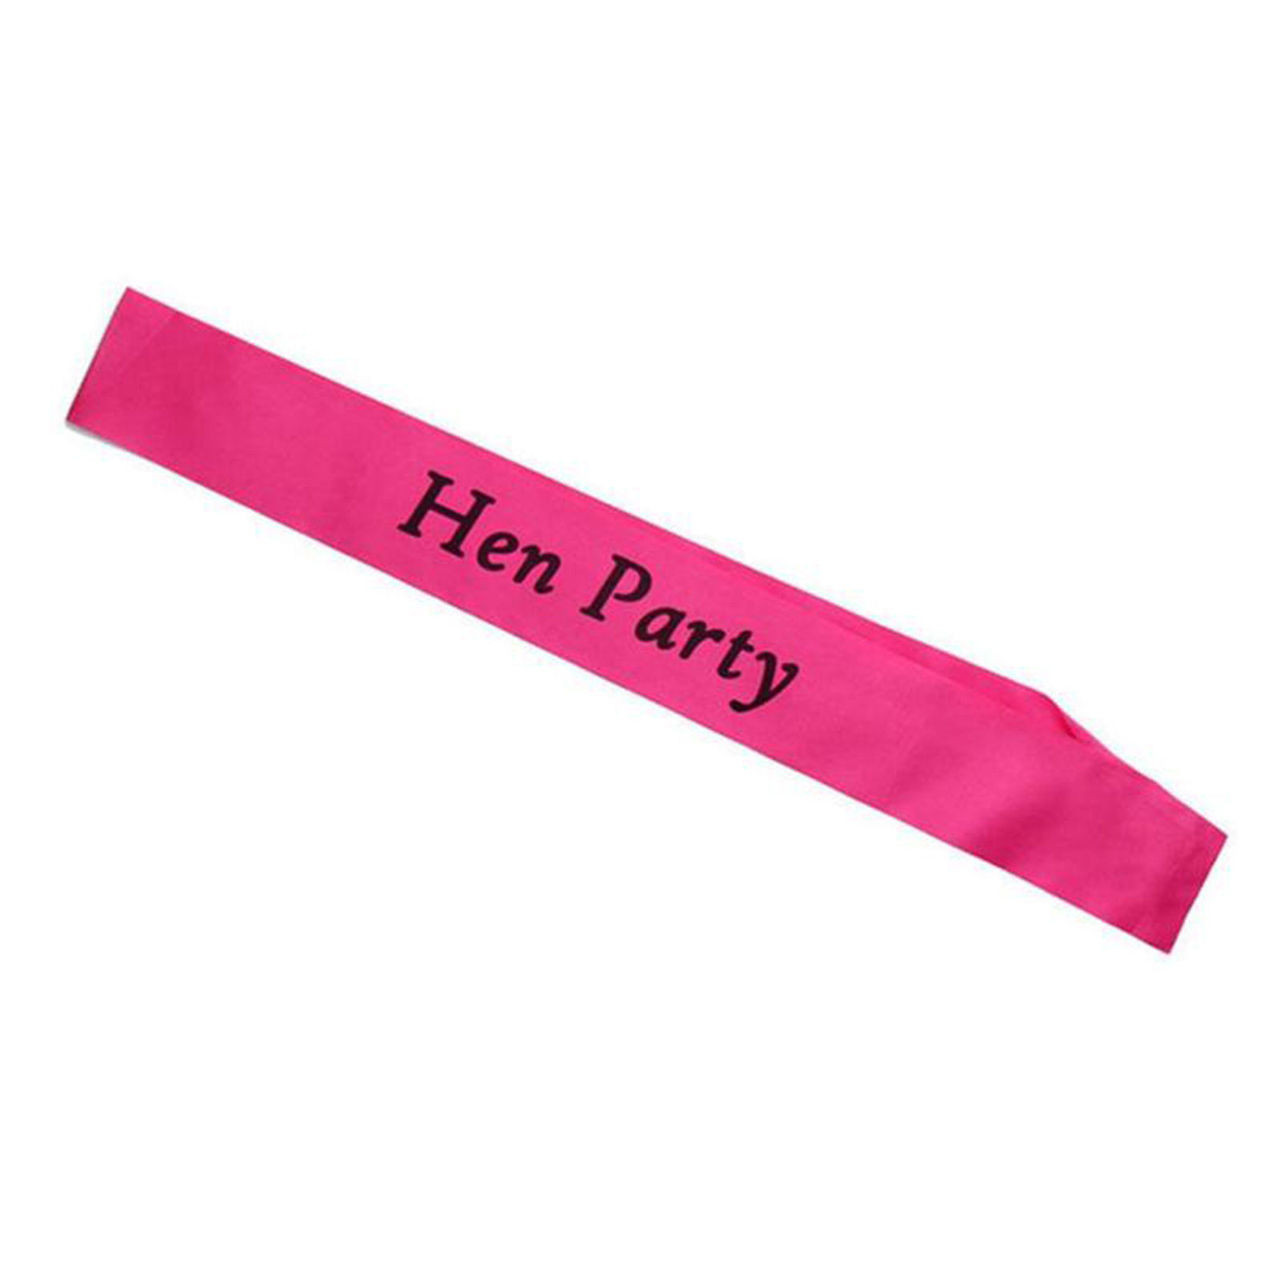 Hens Night Party Red Sash with White Writing - MATE OF HONOUR (Nautical  Theme)